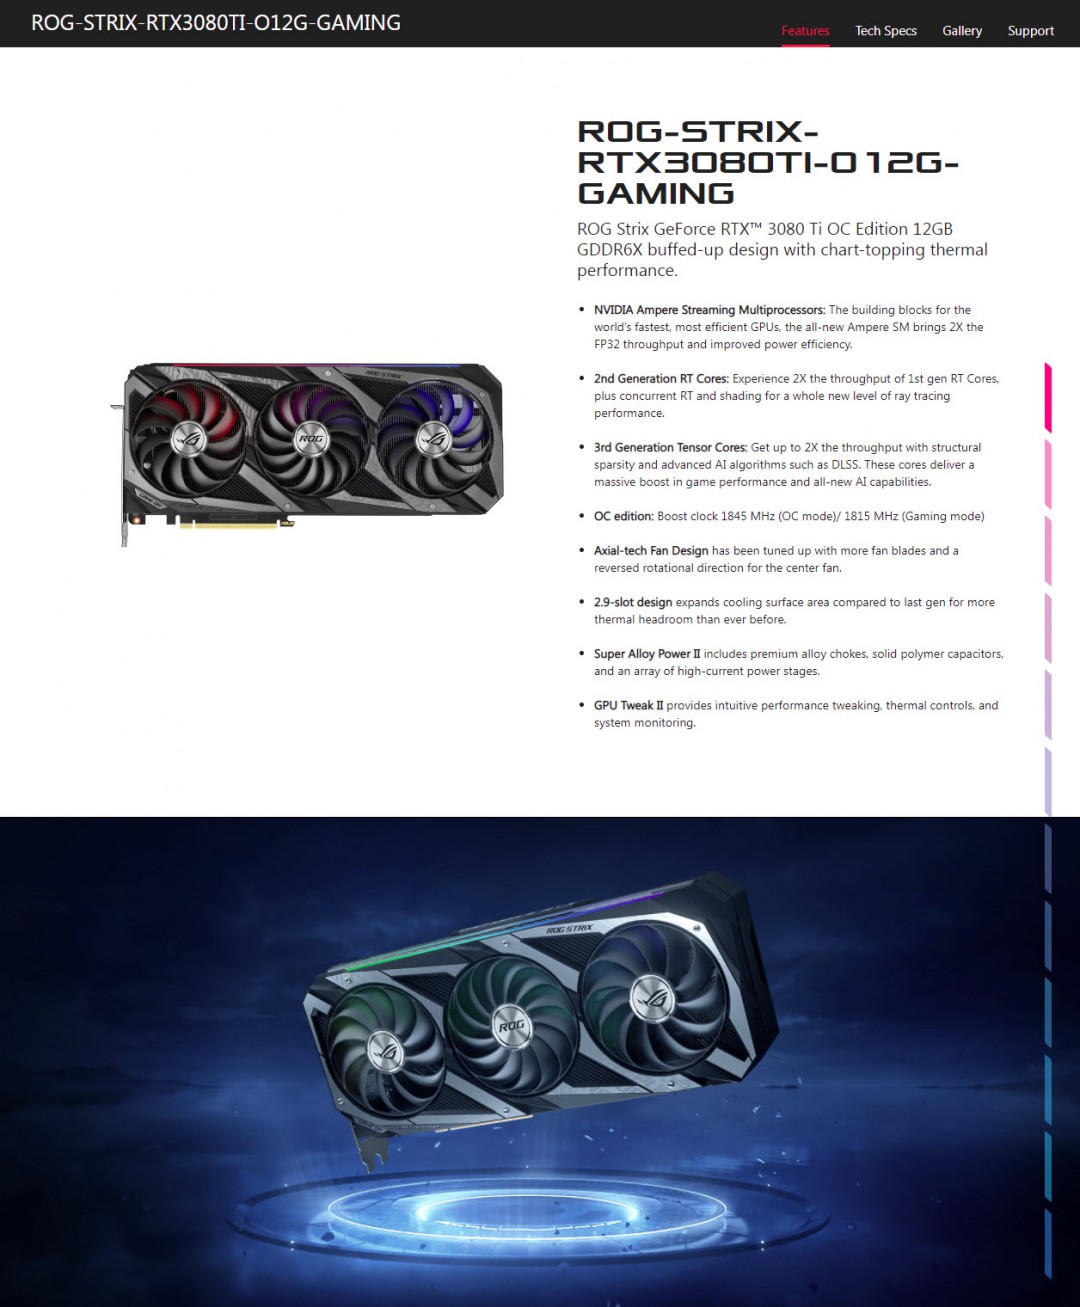 2021 06 11 21 16 28 ASUS ROG Strix GeForce RTX 3080 Ti OC Edition Review